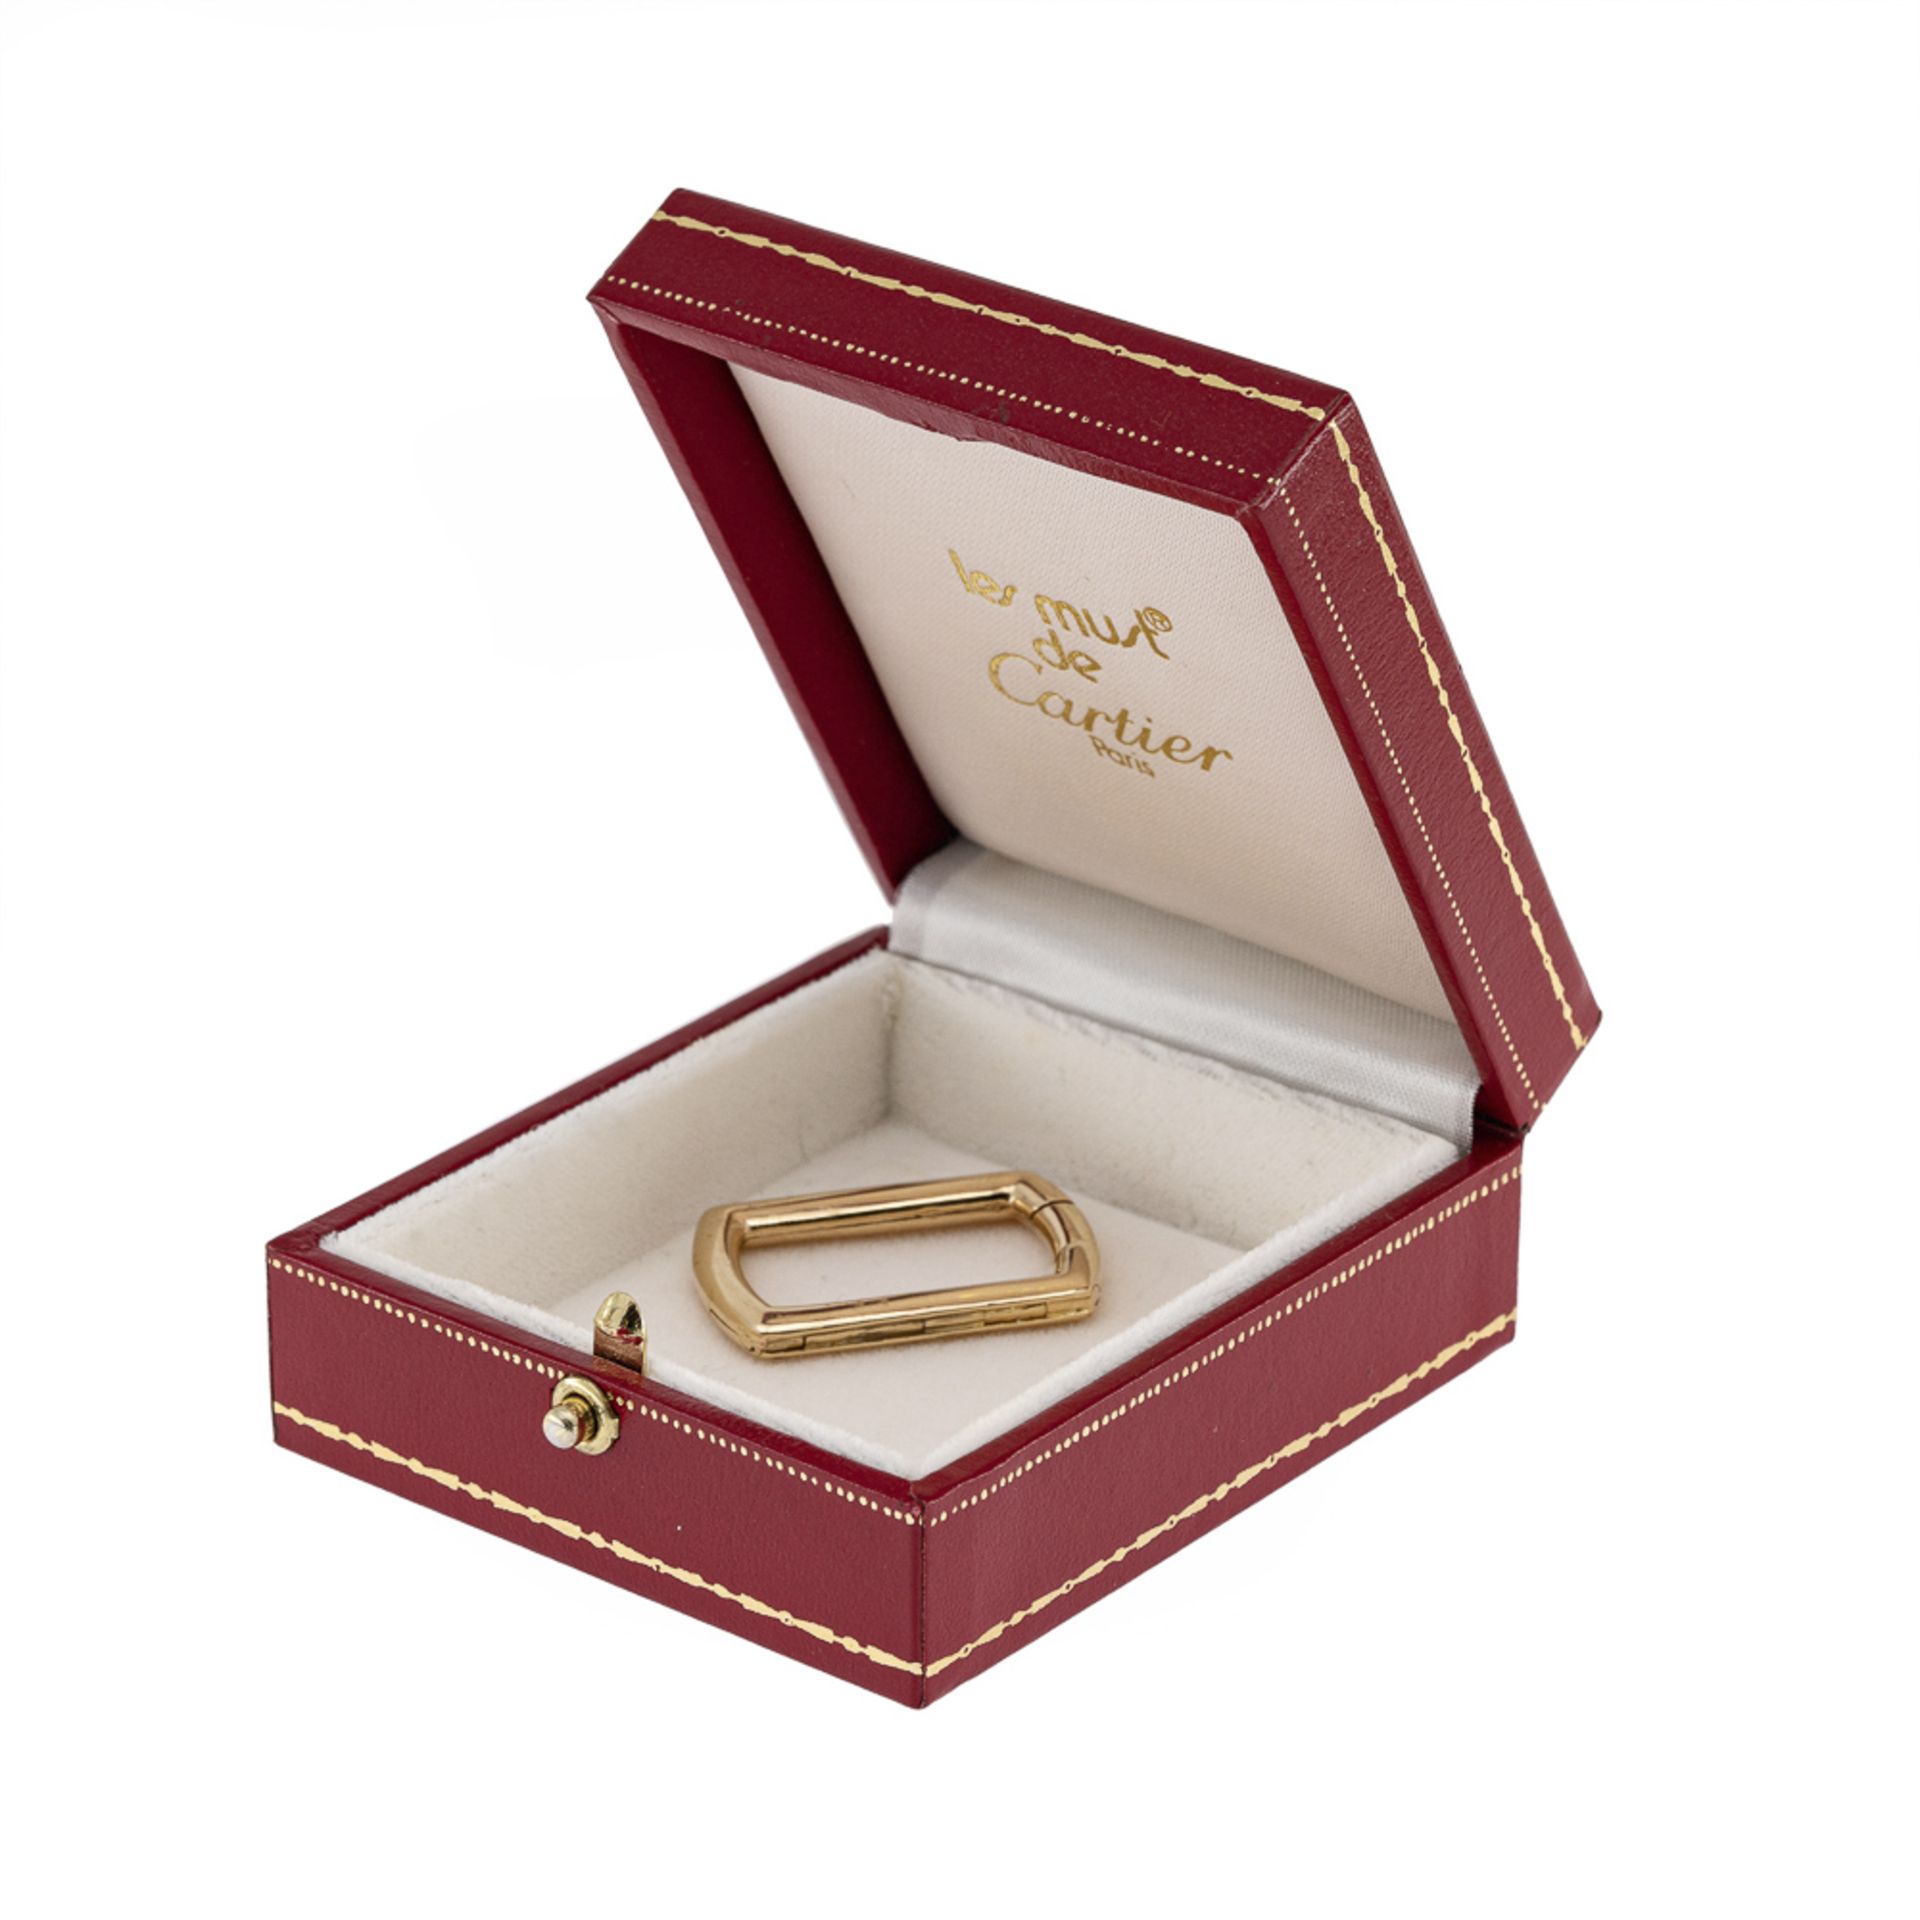 Cartier 18kt yellow gold key ring - Image 2 of 3